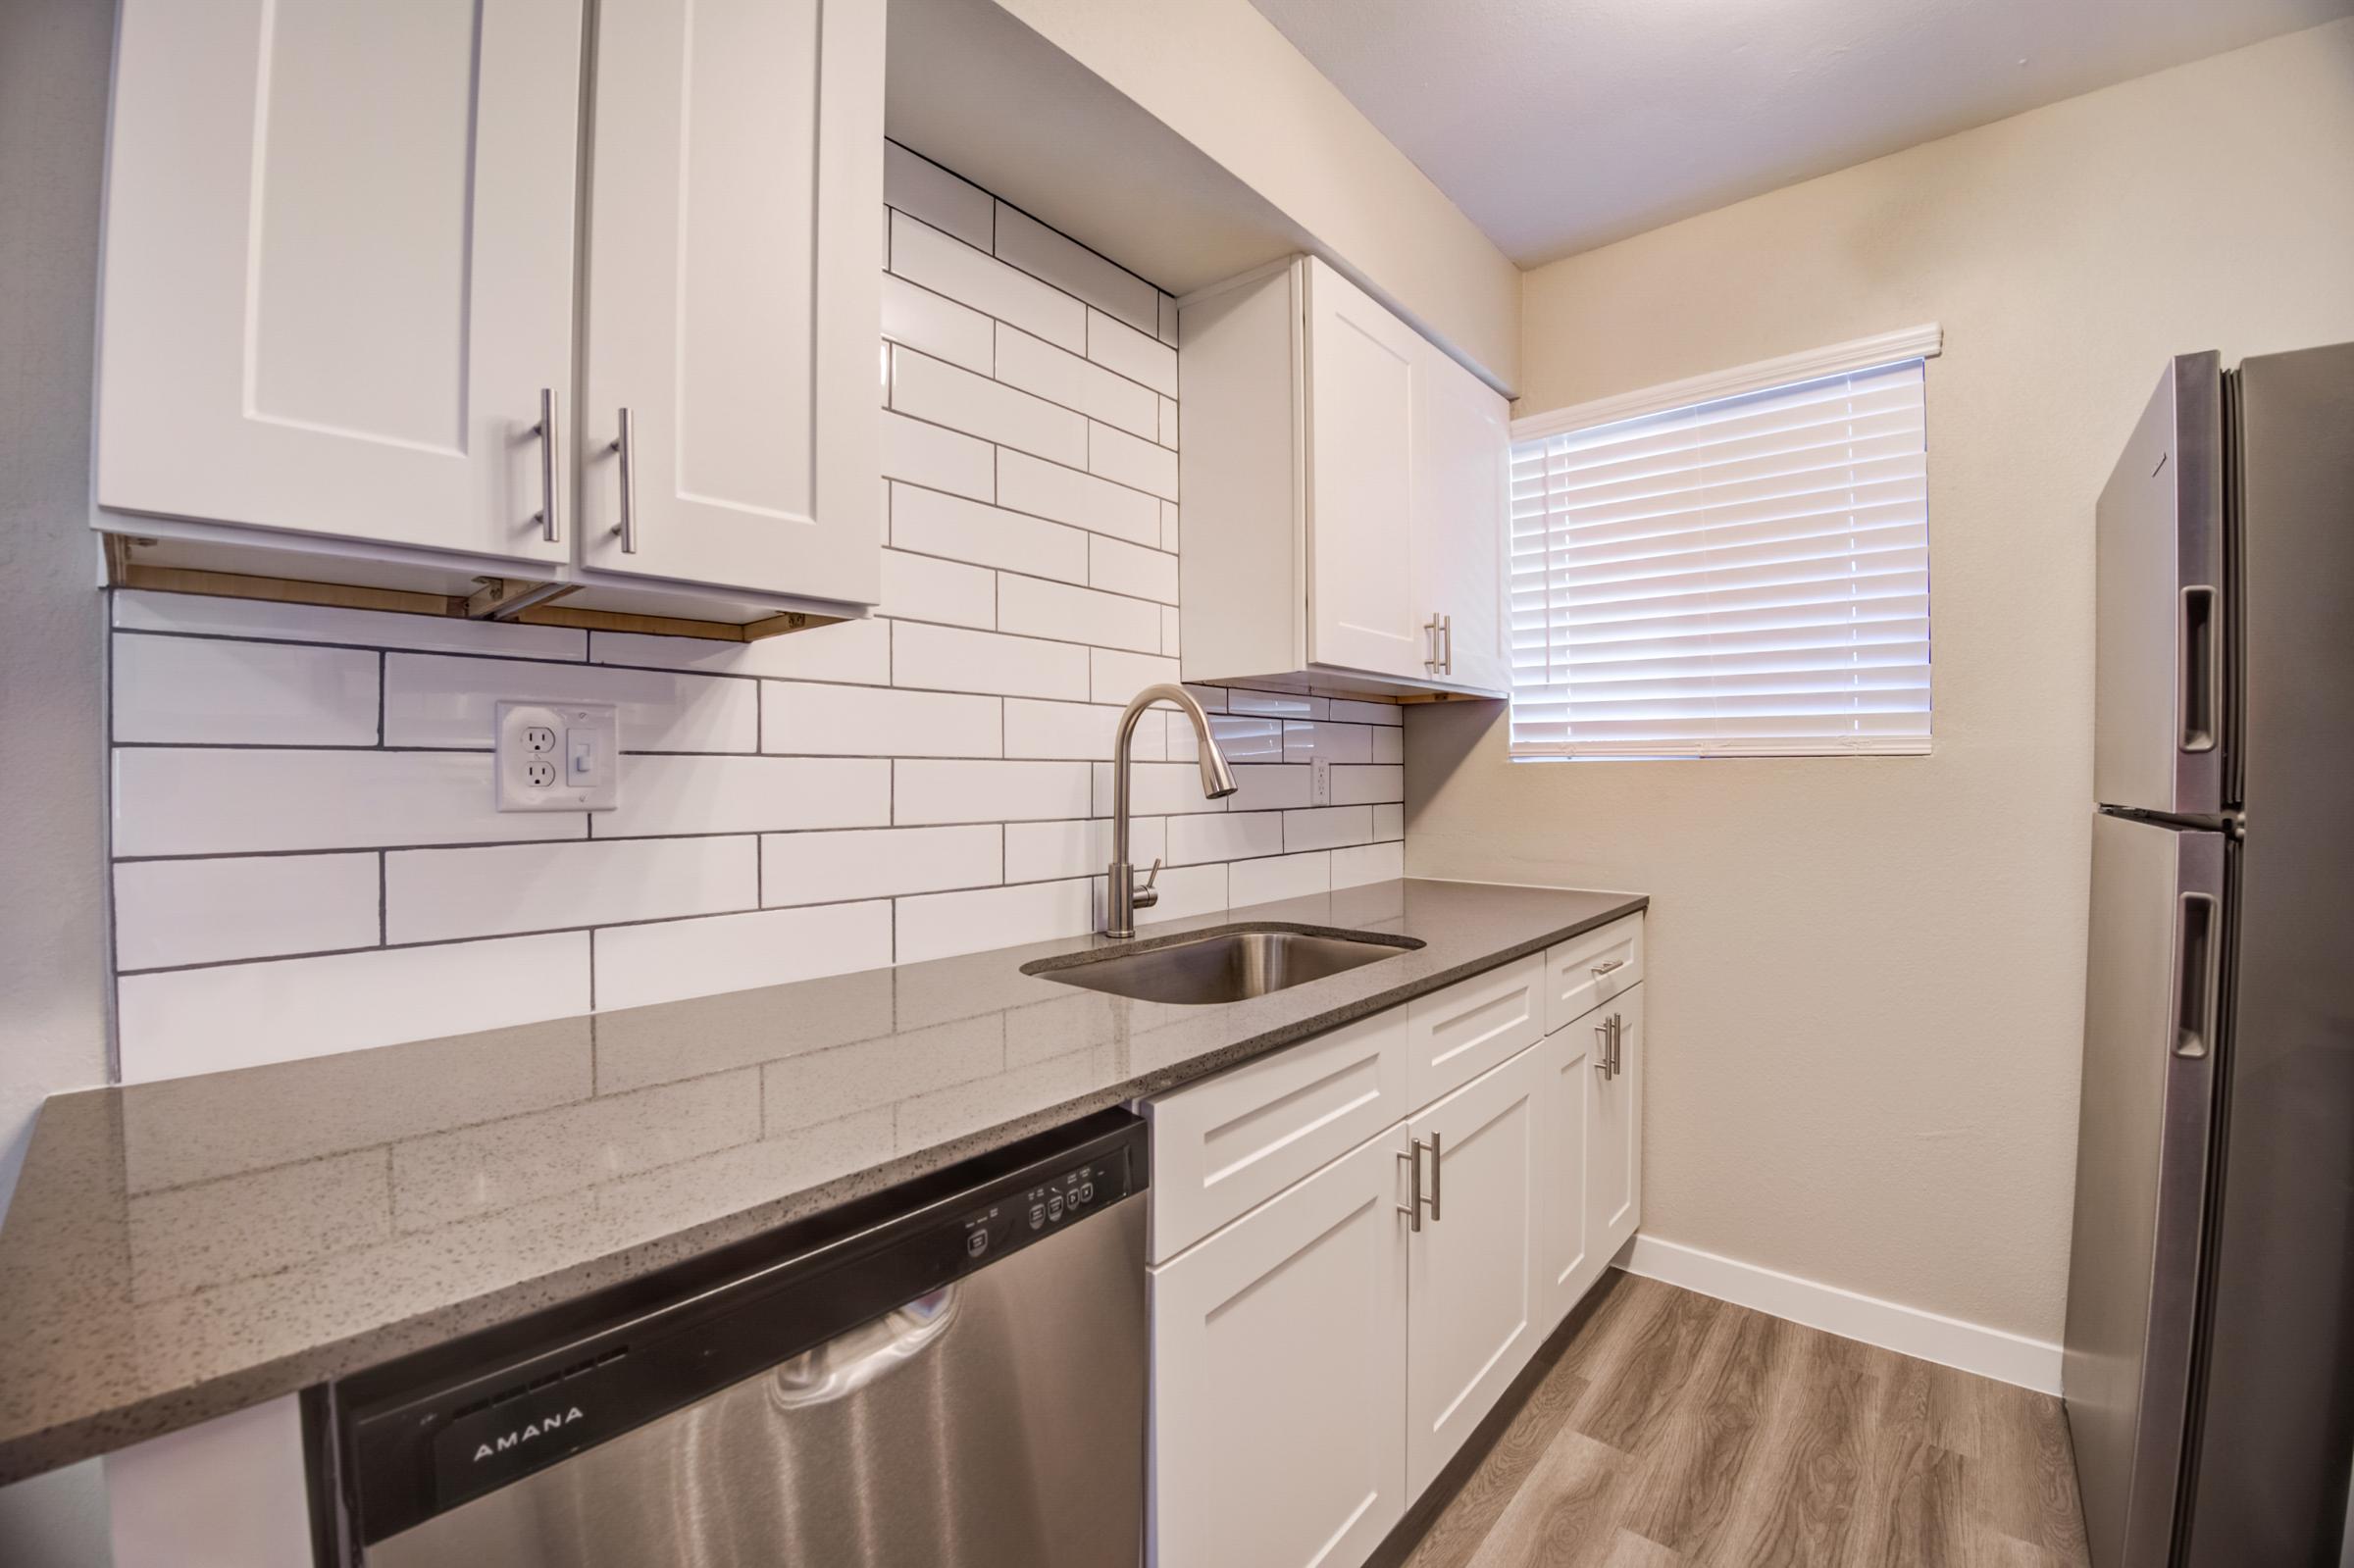 Rise at the Meadows remodeled kitchen with white cabinets and stainless steel appliances.